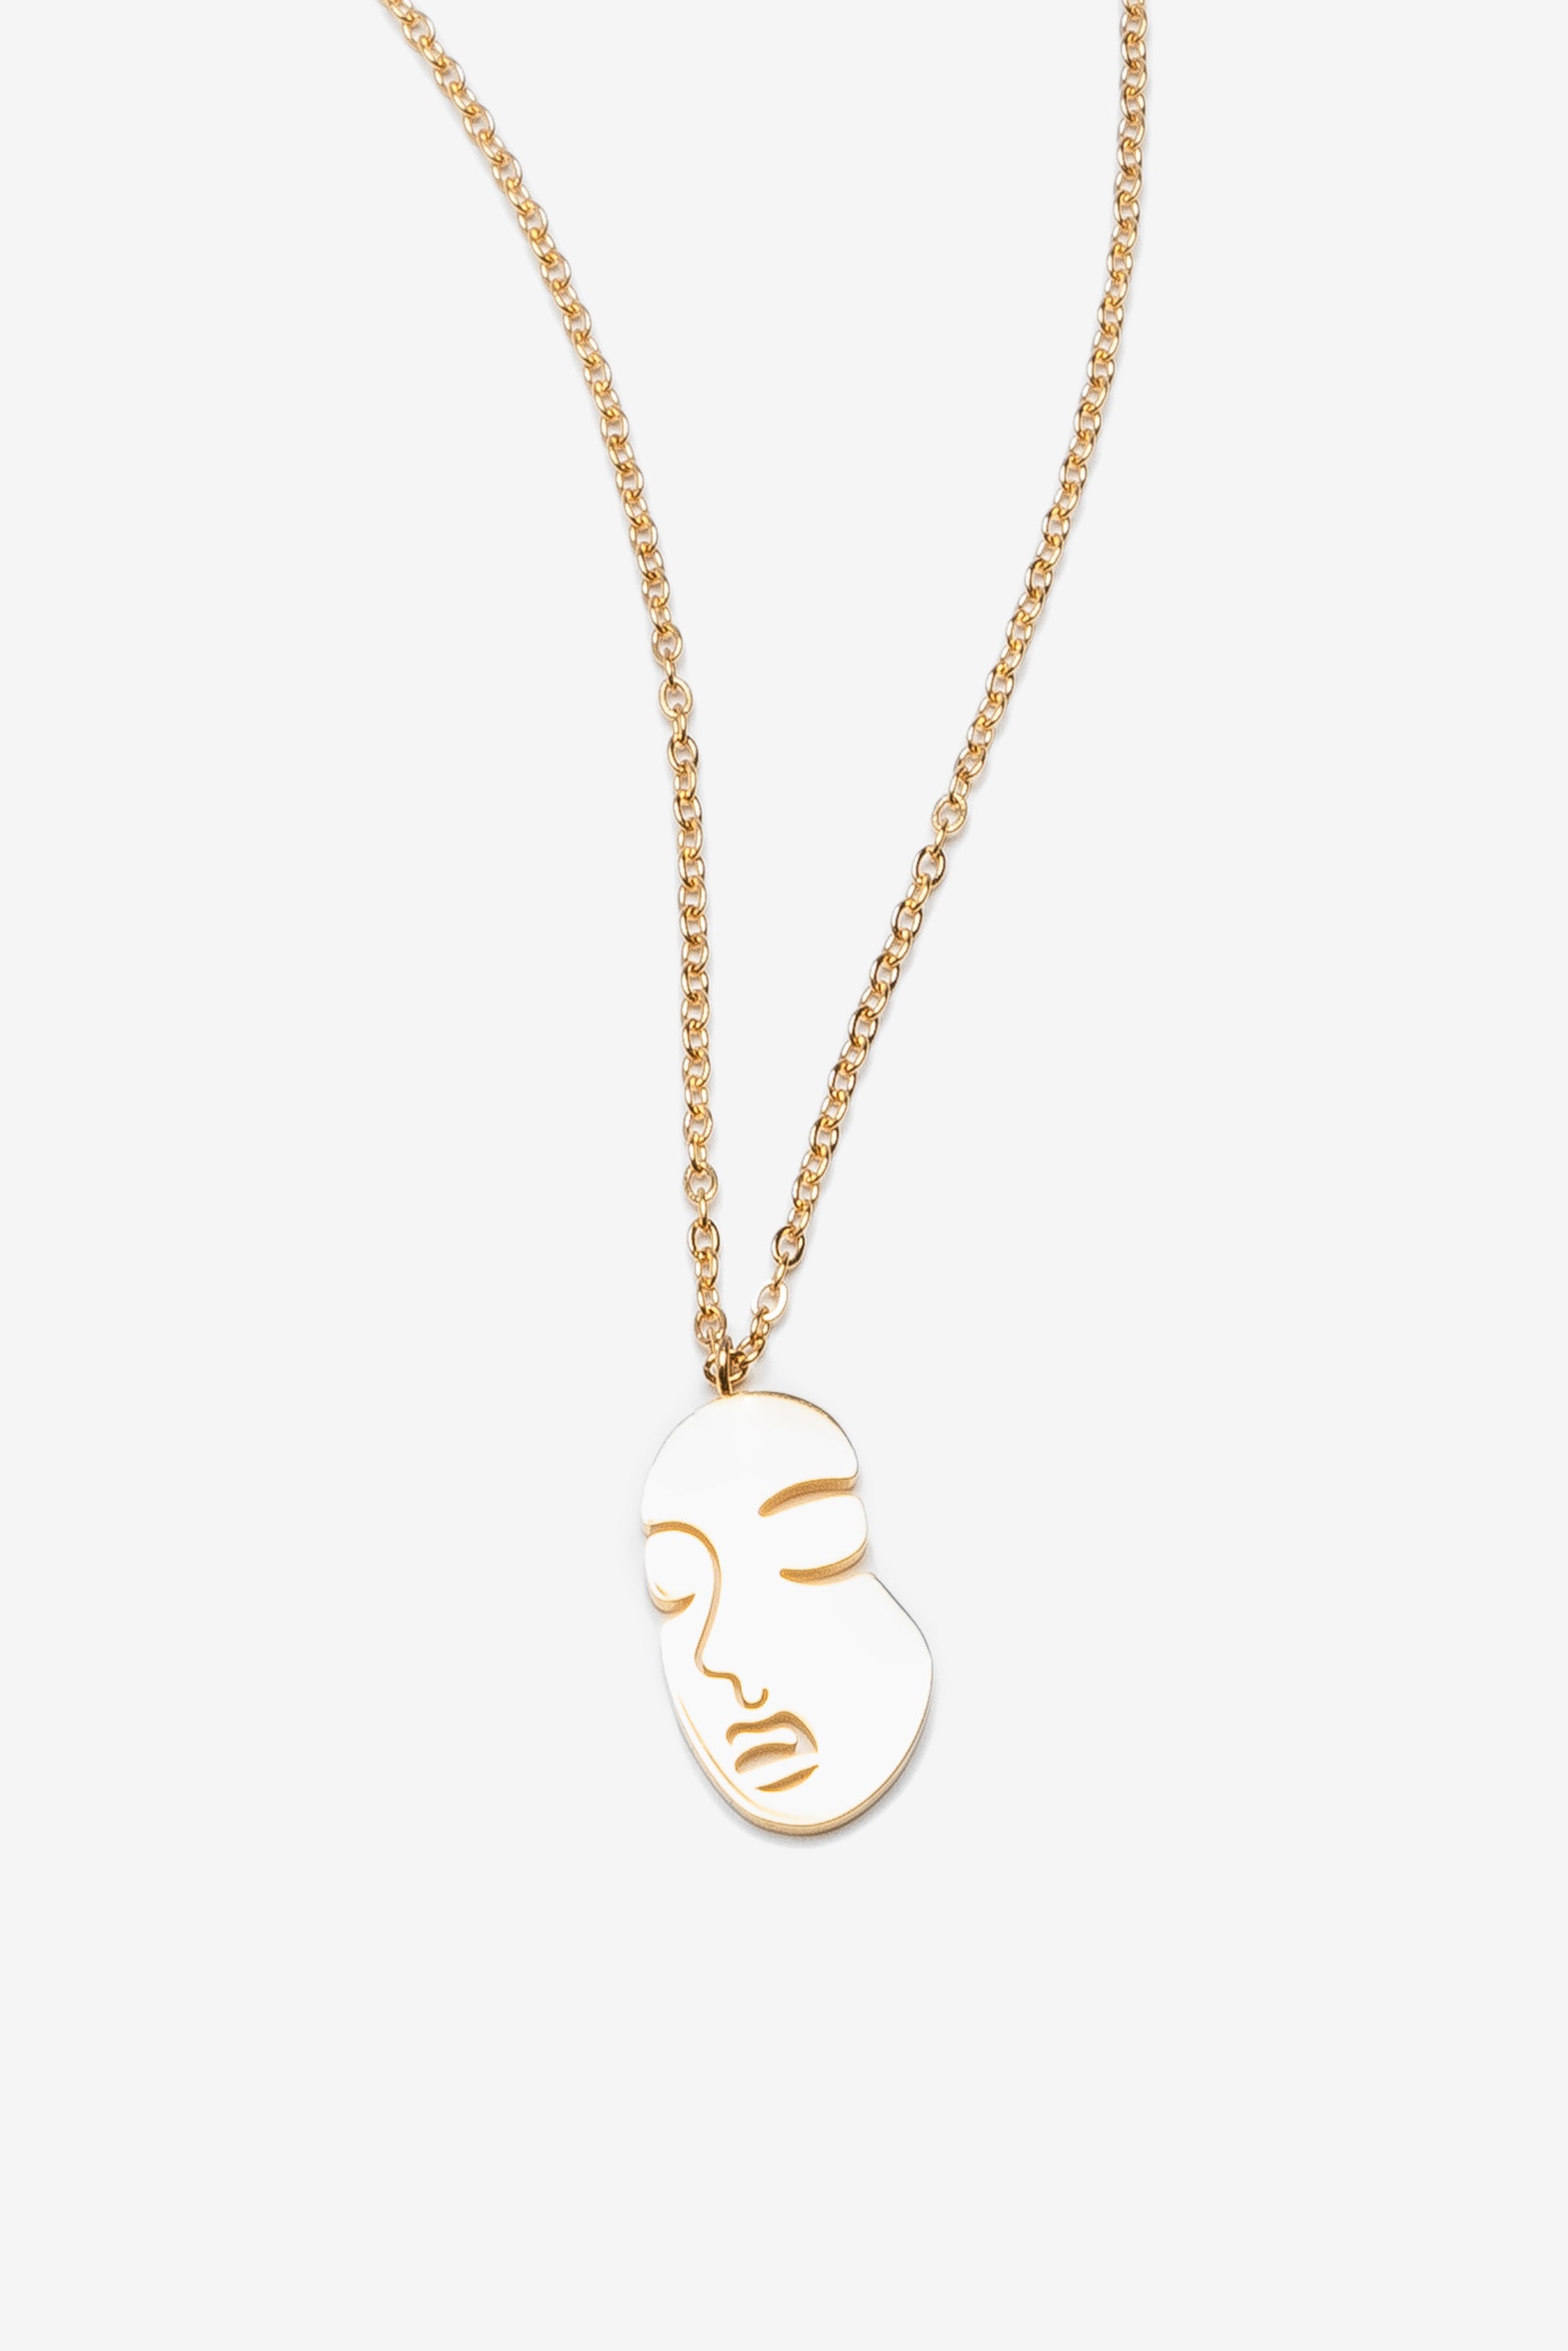 Serenity Necklace with Simple Chain - Gold